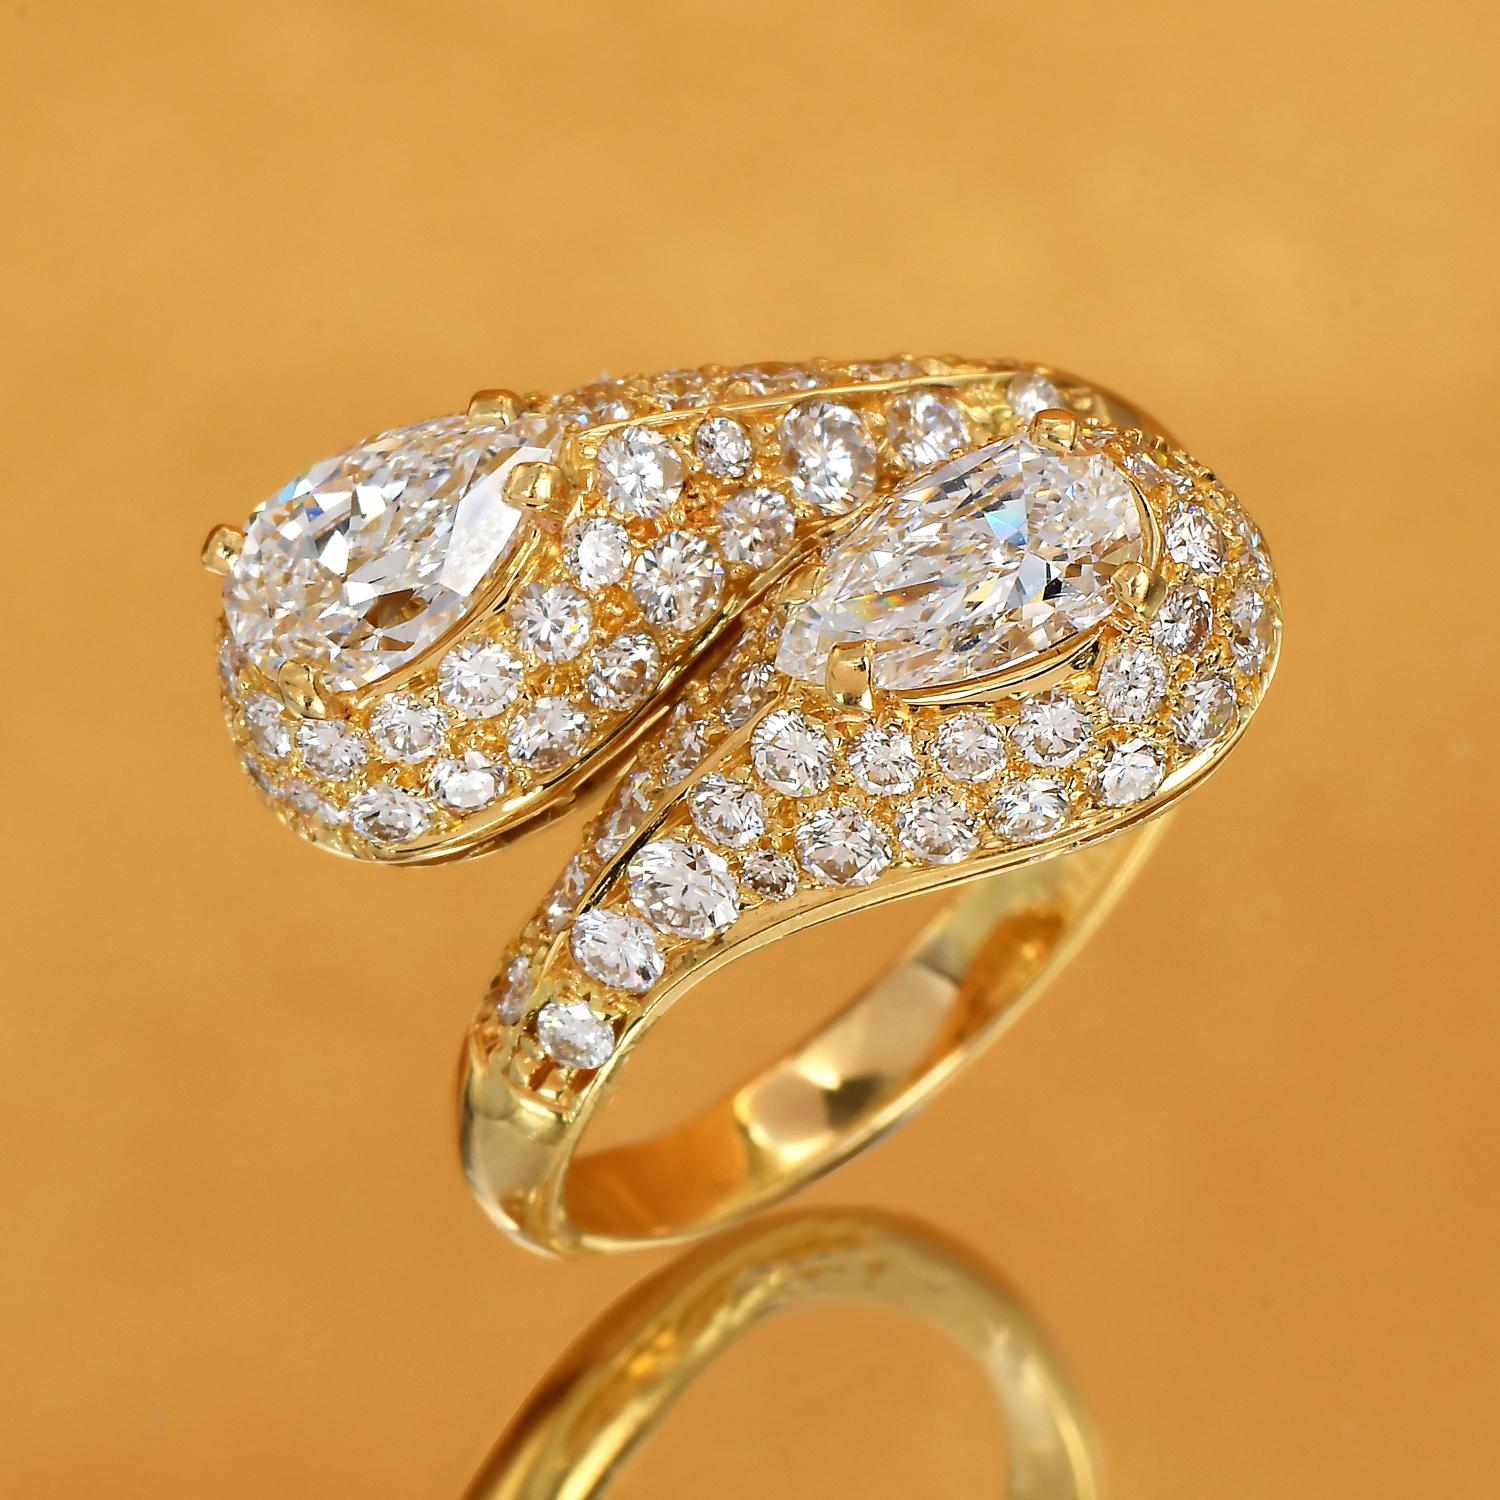 Cartier French Pear Diamond 18k Yellow Gold Bypass Ring In Excellent Condition For Sale In Miami, FL